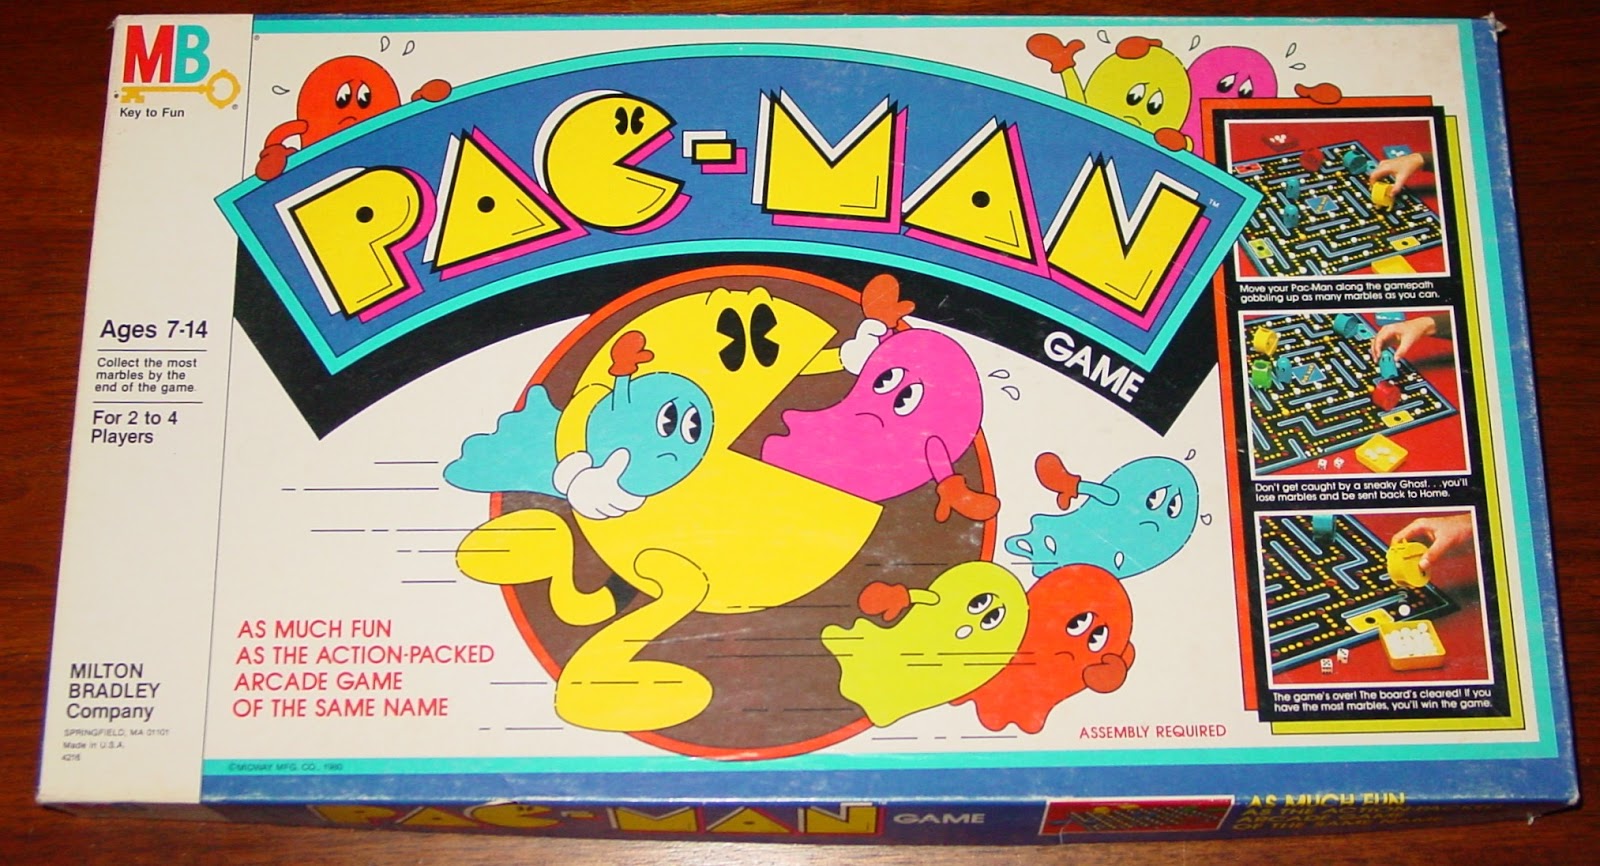 vintage toys - pac man board games - 2 . Key to Fun Move your Poc Mon along the gamepath gobbling up as many marbles as you can Ages 714 Game Collect the most marbles by the end of the game For 2 to 4 Players Don't get caught by a sneaky Ghost...you'll lo